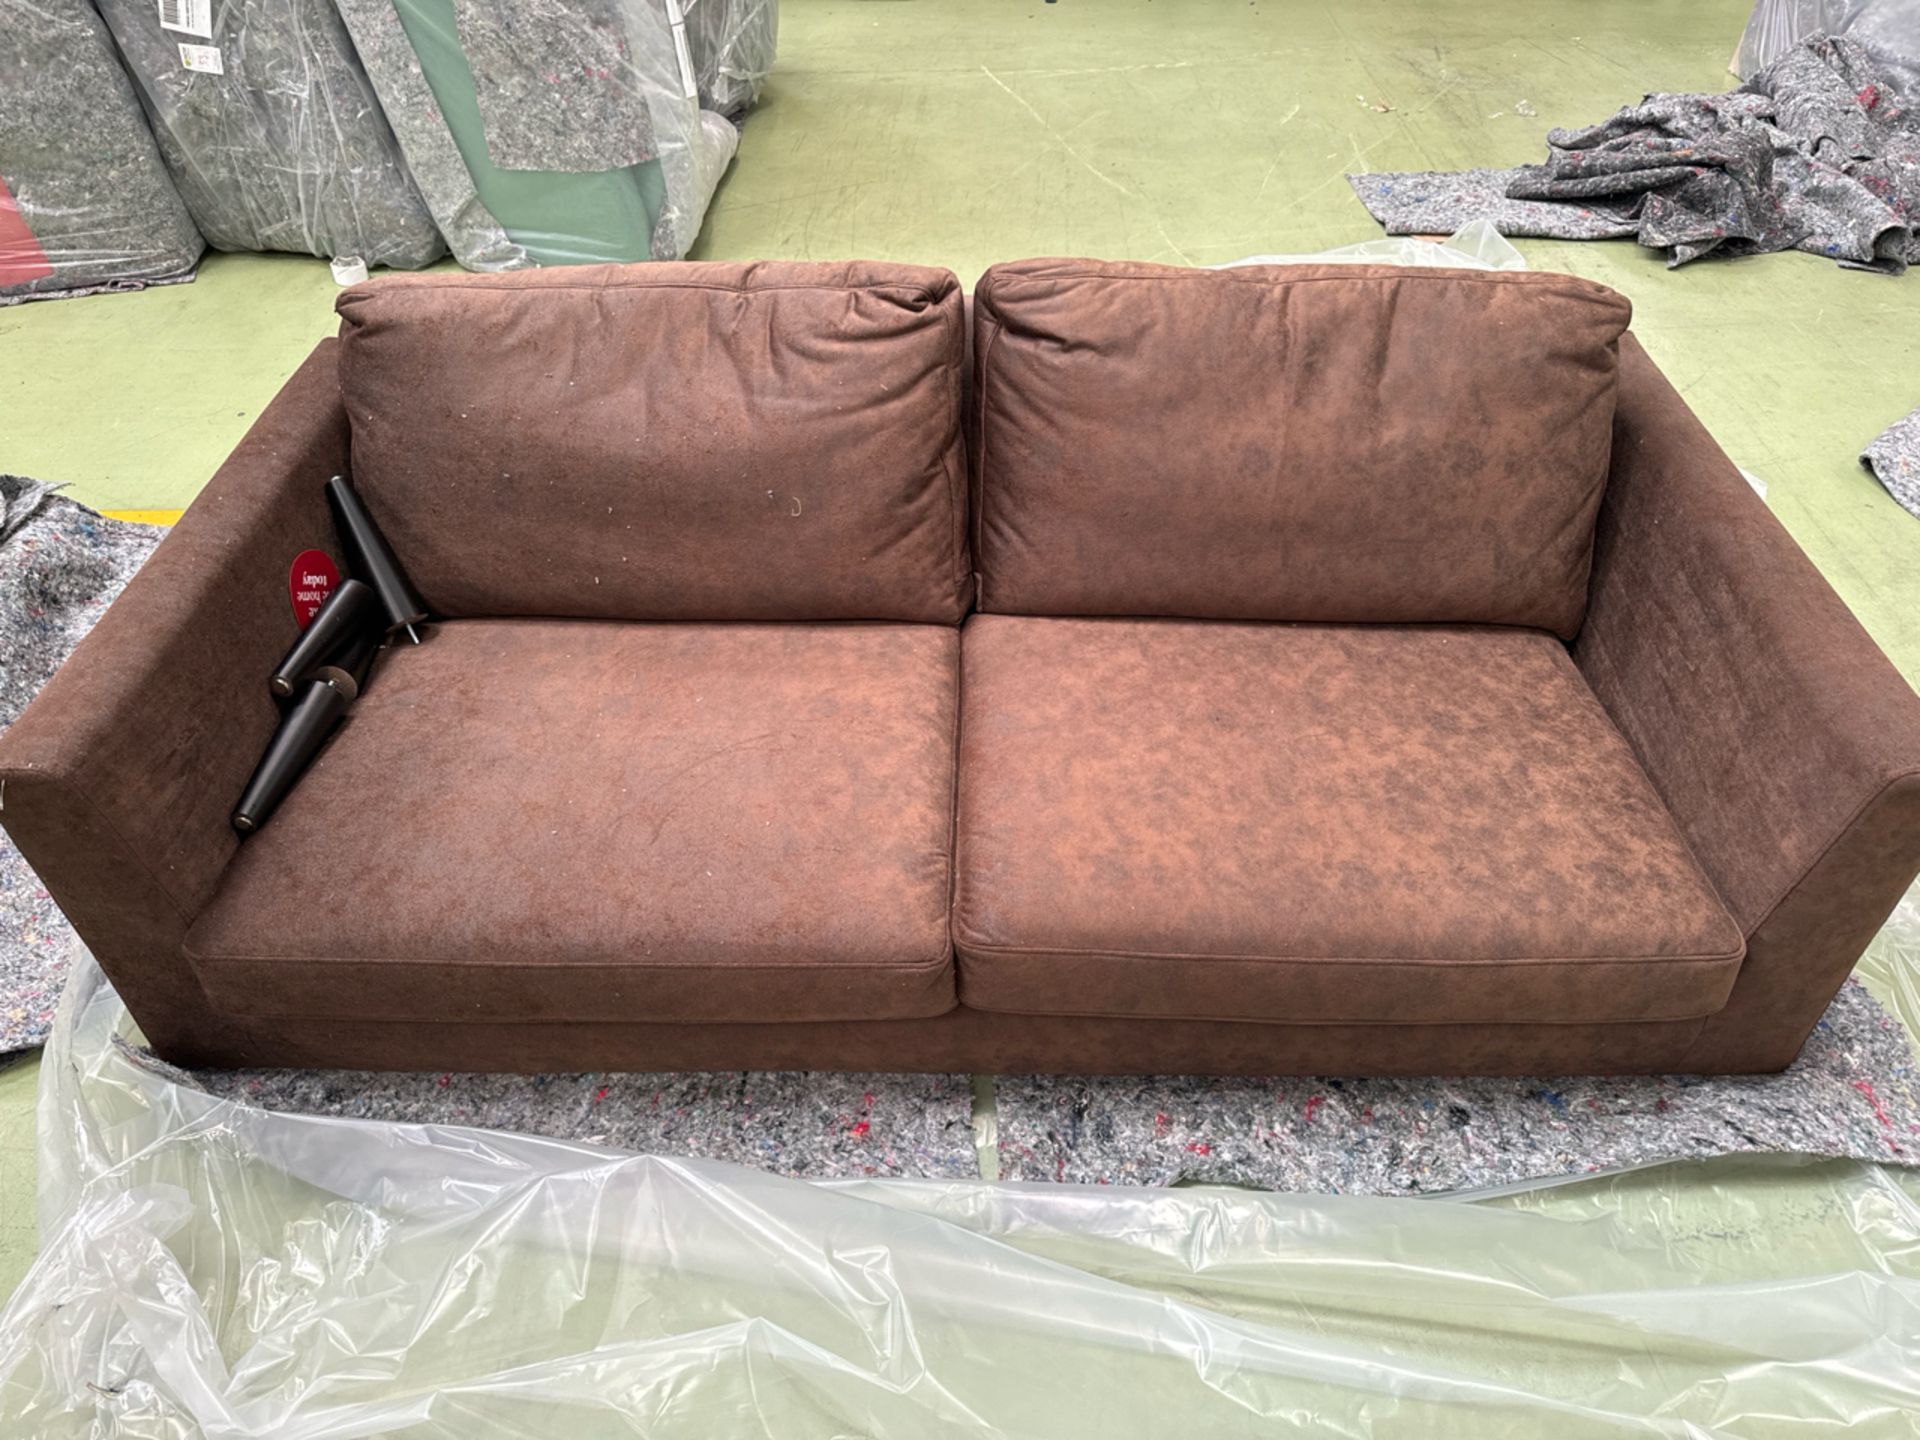 Jude 3 Seat Sofa In Chocolate Faux Leather - Image 2 of 6